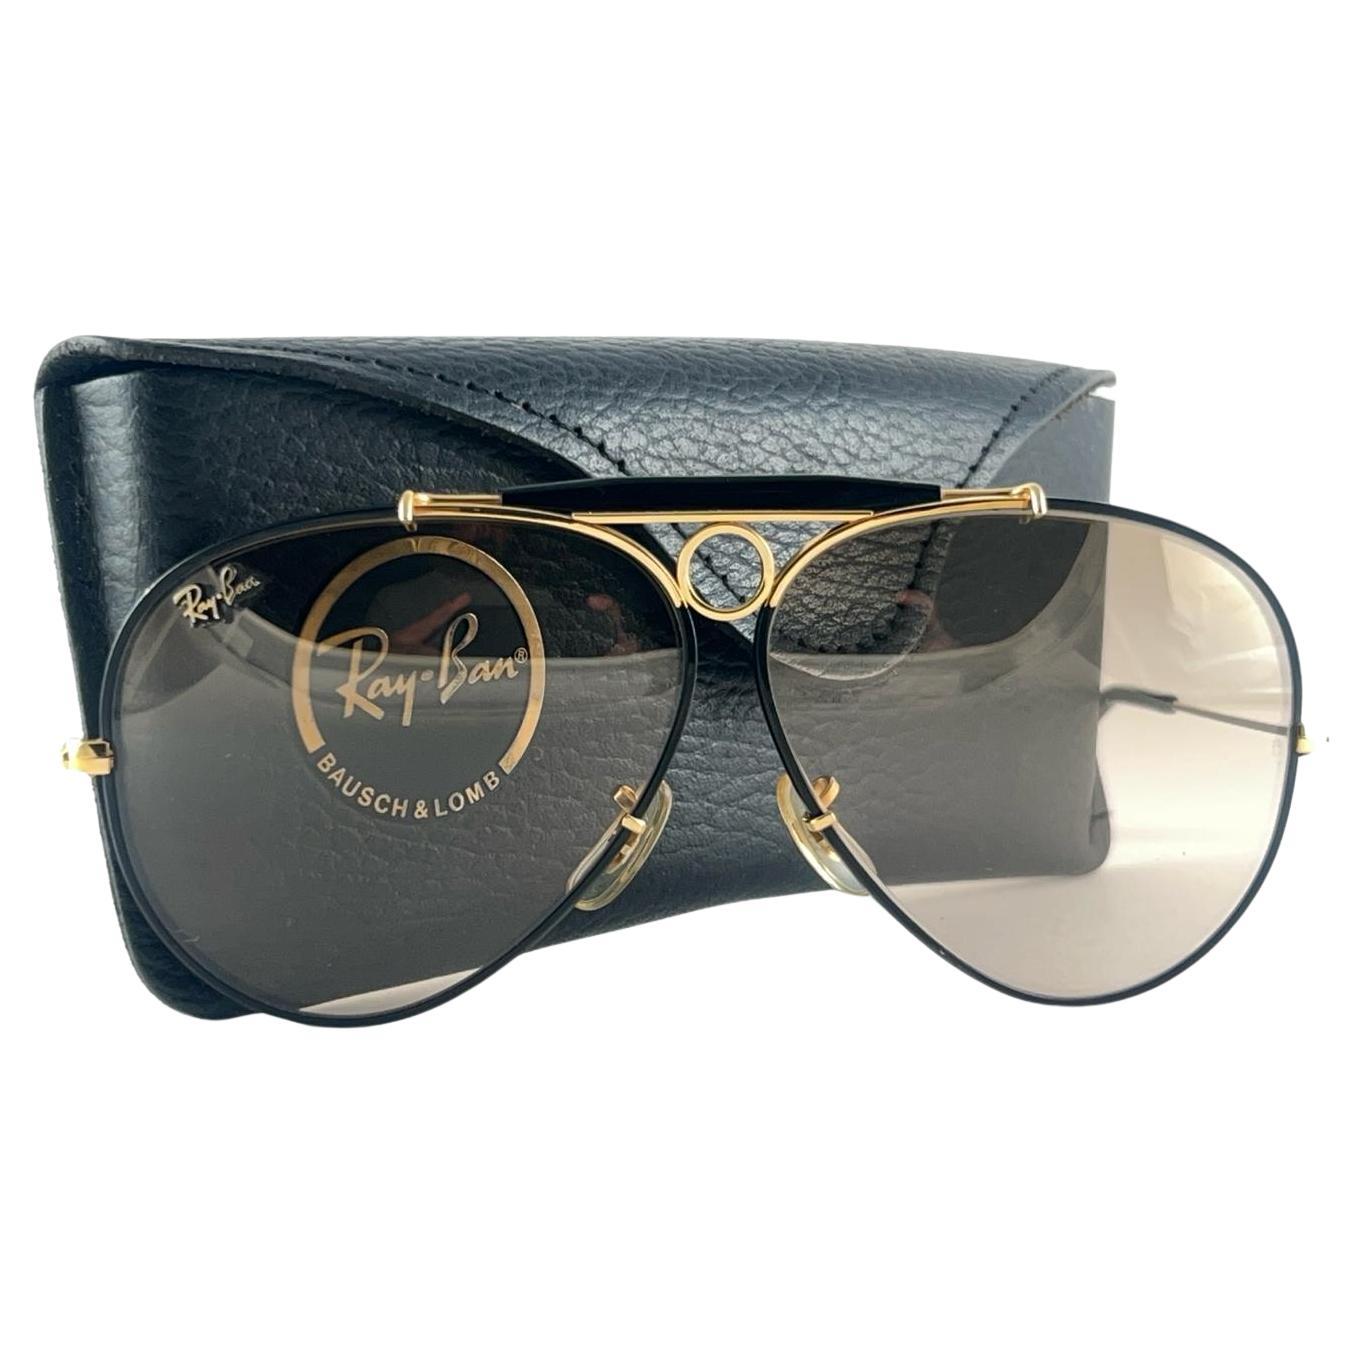 New Ray Ban Precious Metals 24K Gold & Black Shooter 62Mm USA Sunglasses For Sale